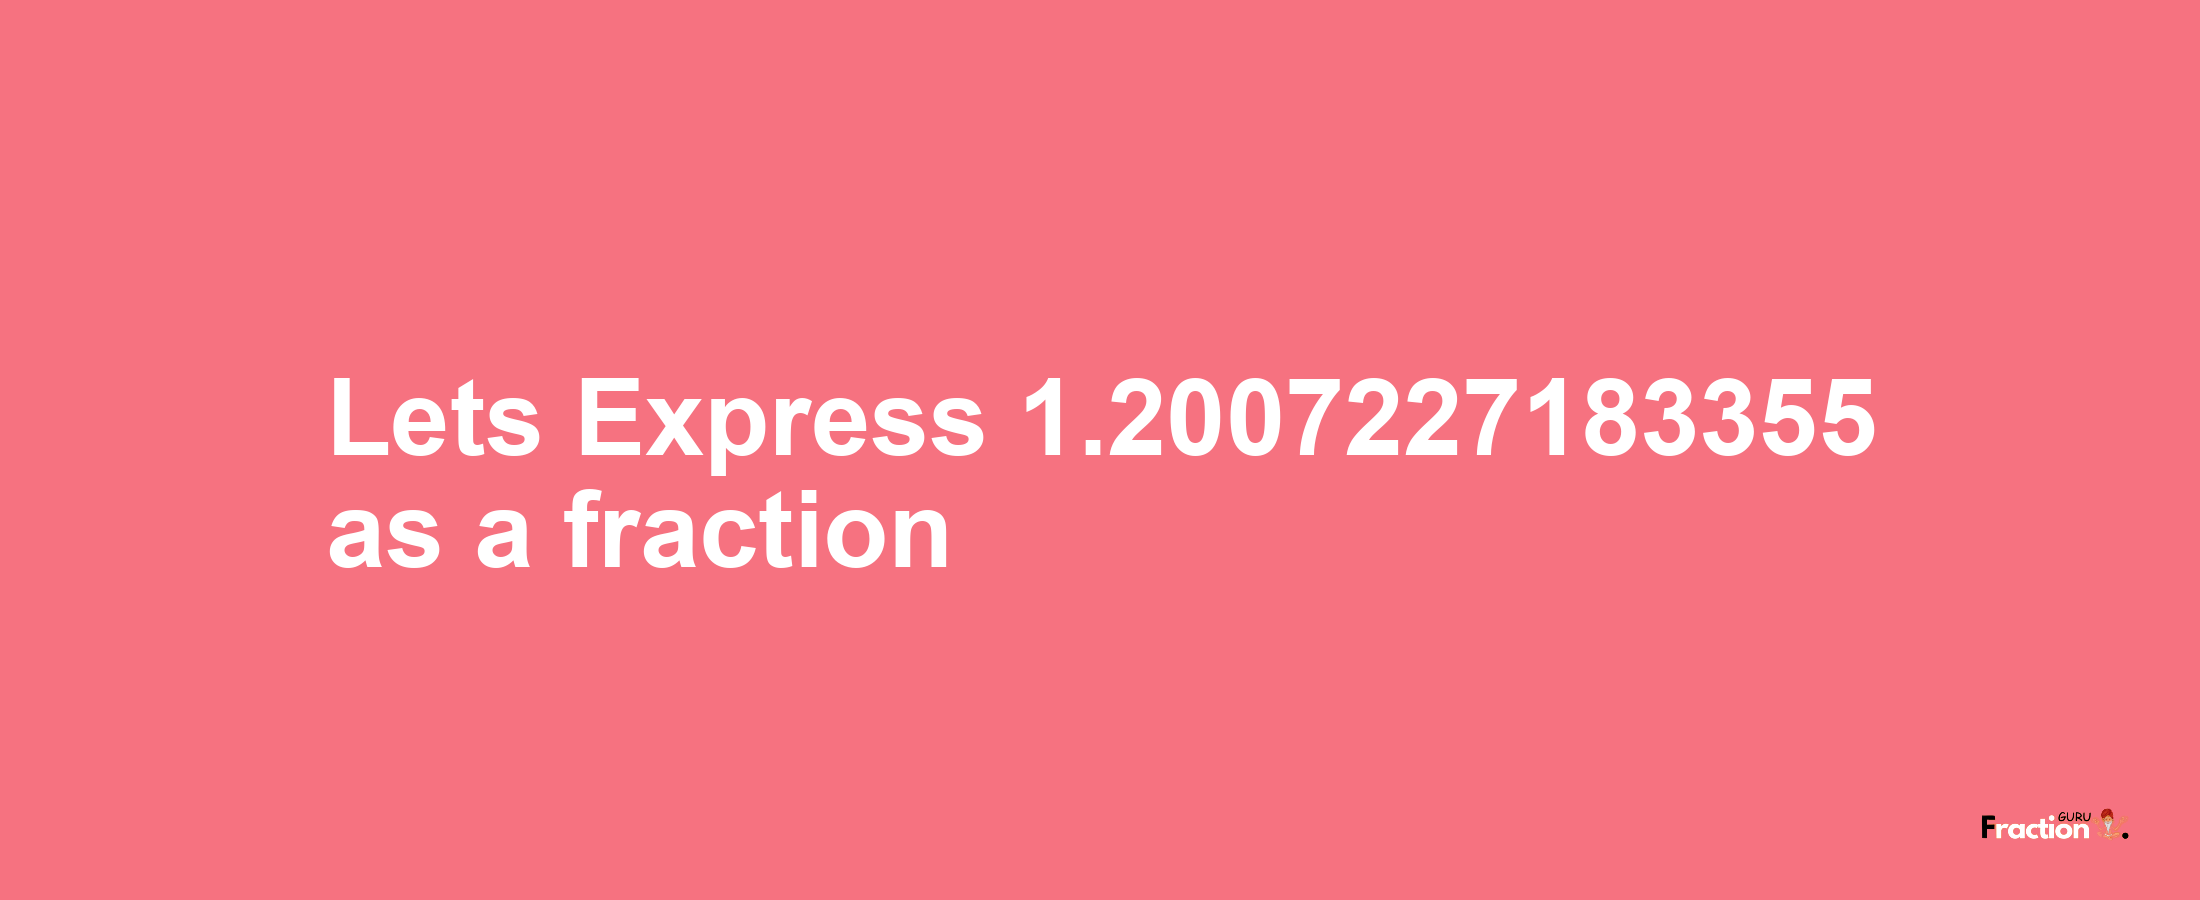 Lets Express 1.2007227183355 as afraction